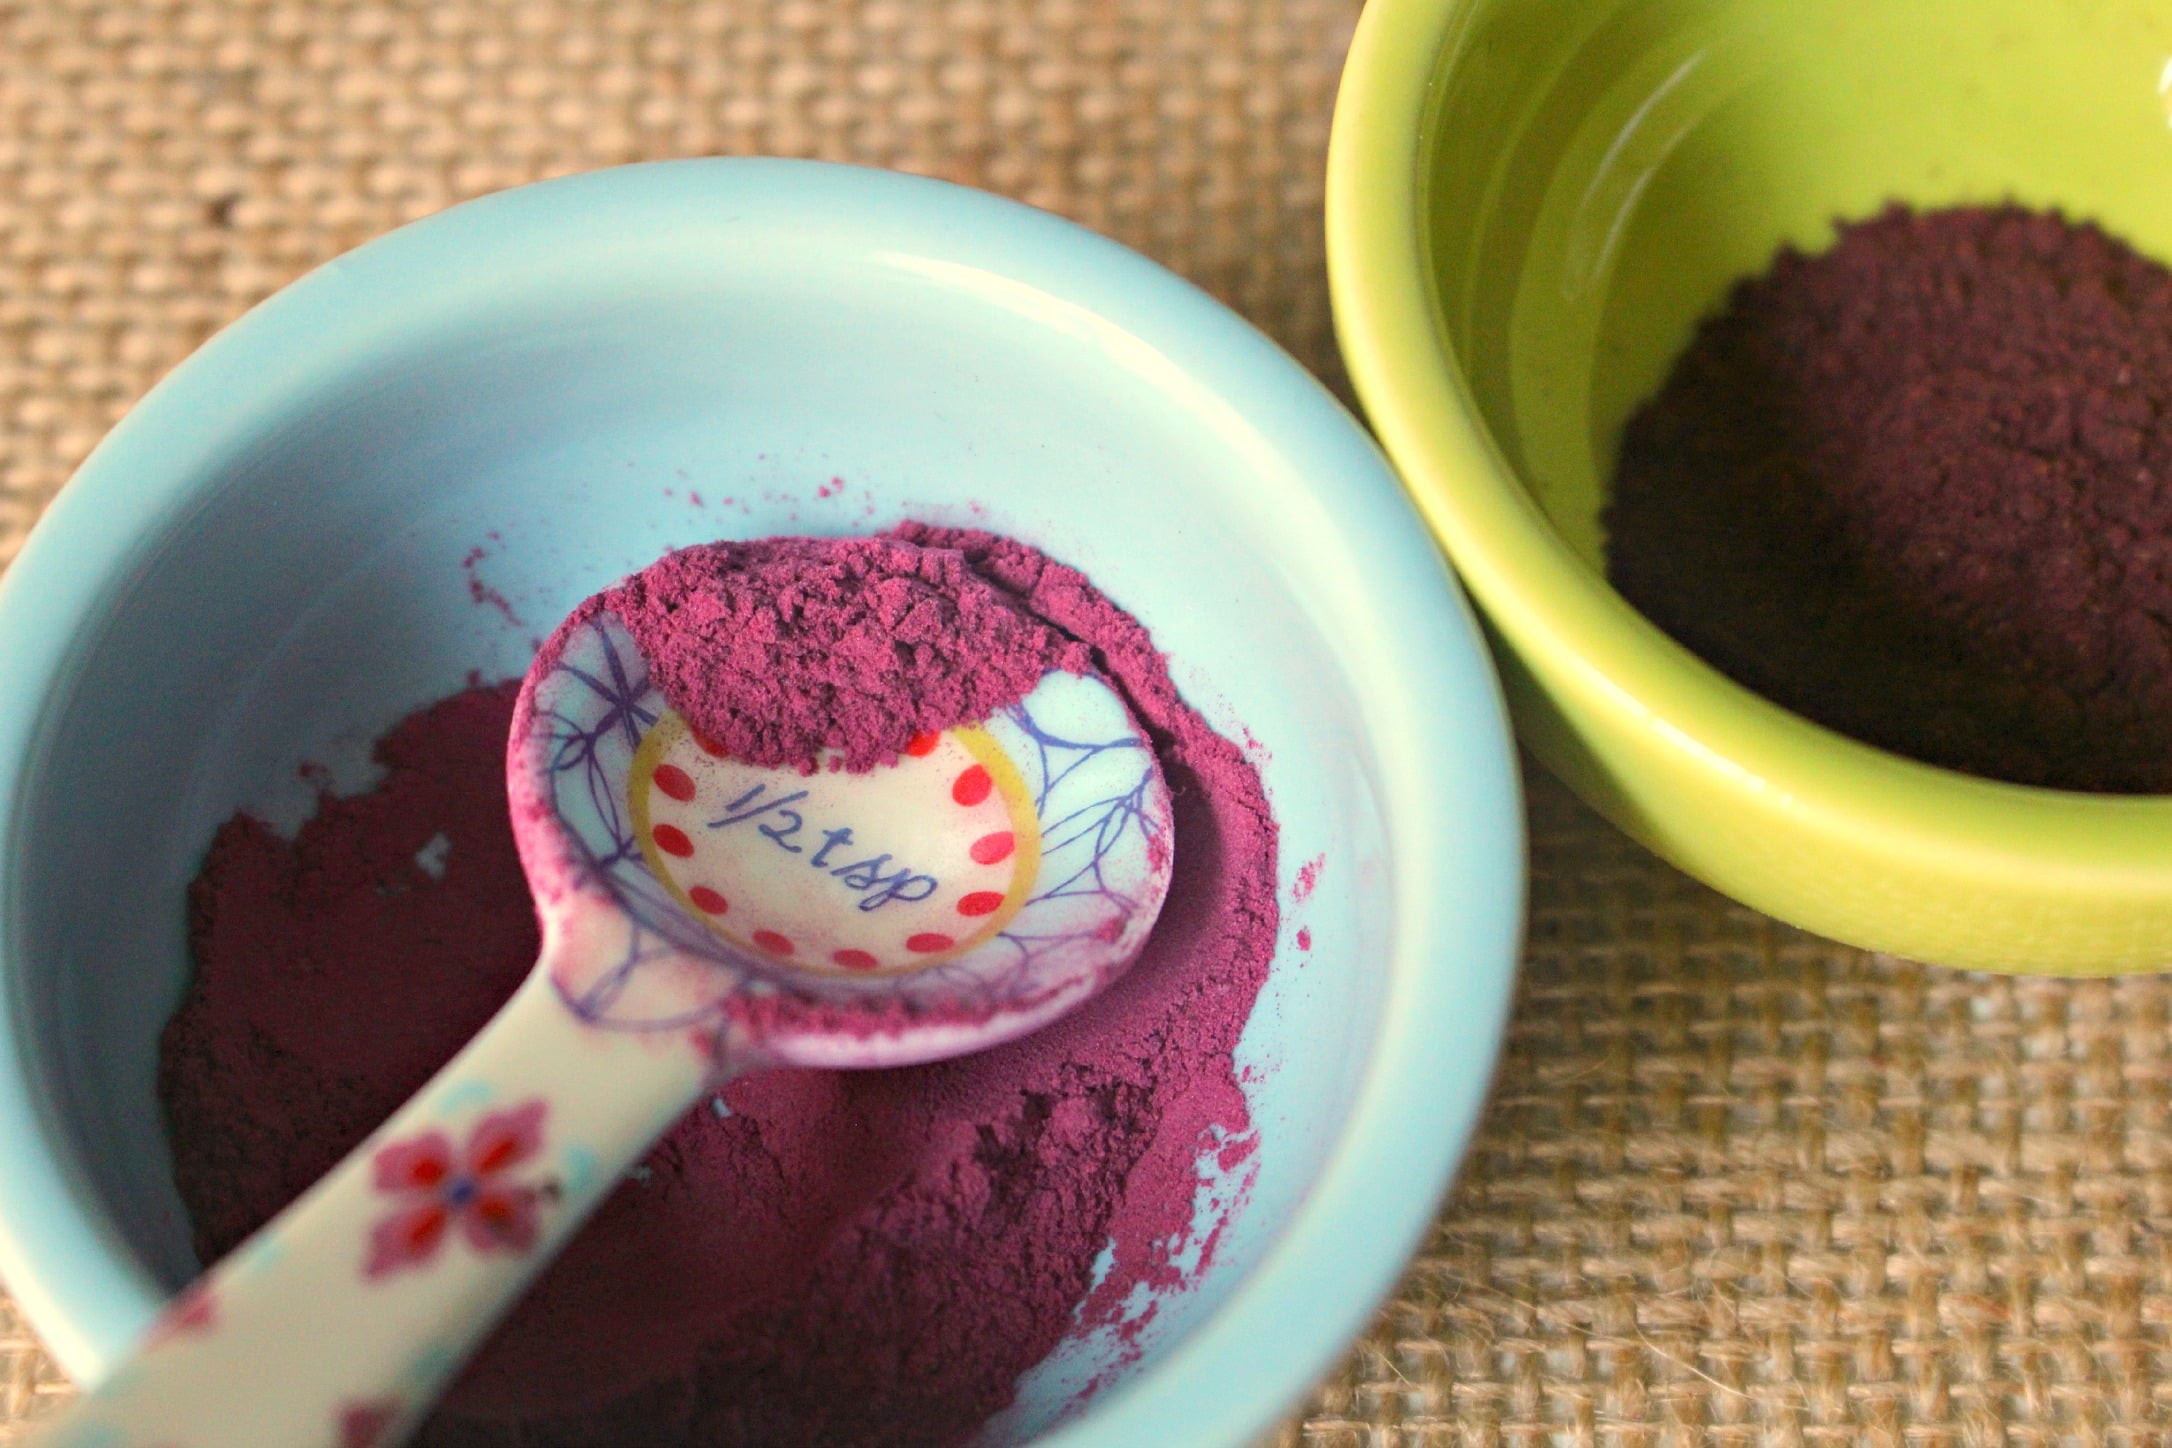 How to Make Lip Balm: Hibiscus and beet root powder for making tinted lip balm at home